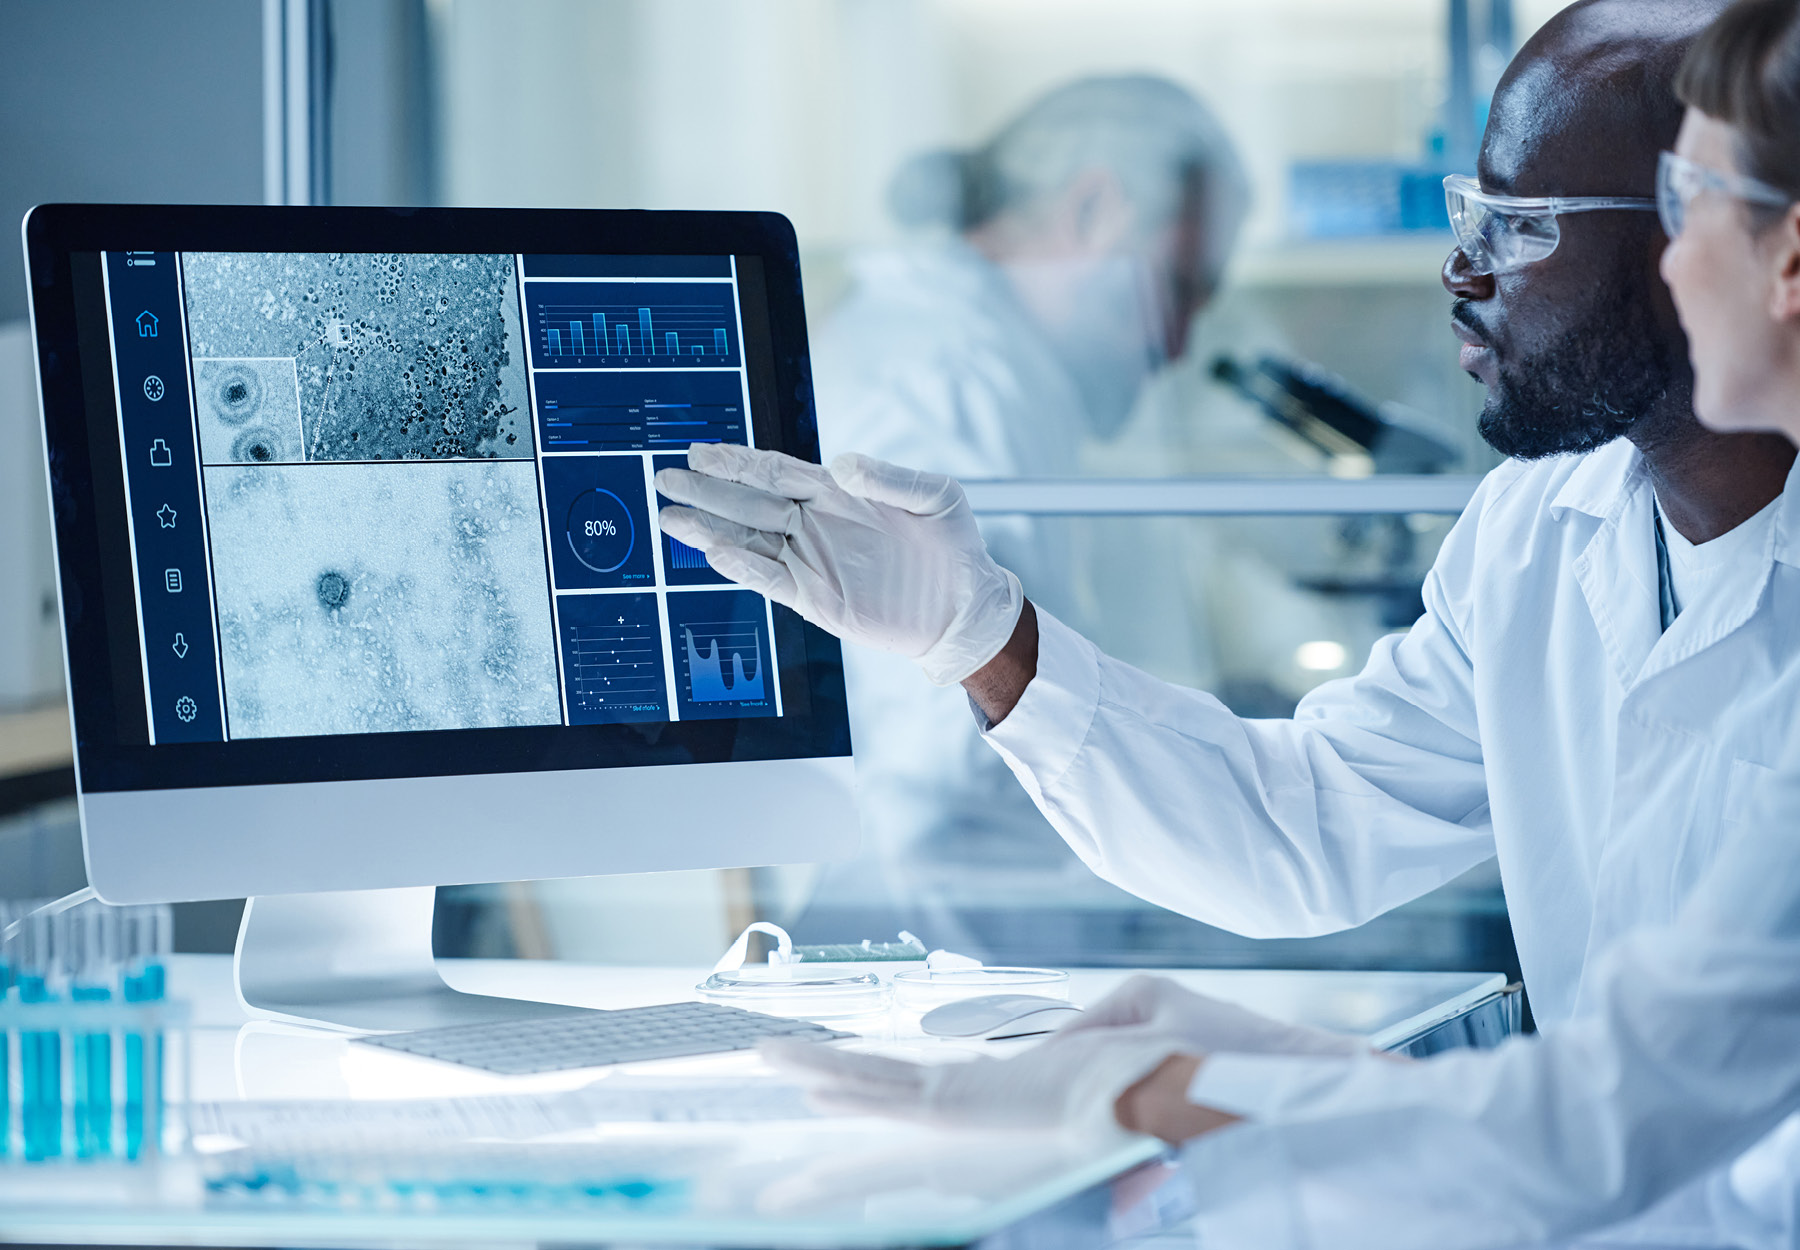 Gloved lab technician pointing to cancer analysis on a computer screen wearing safety glasses iStock Image